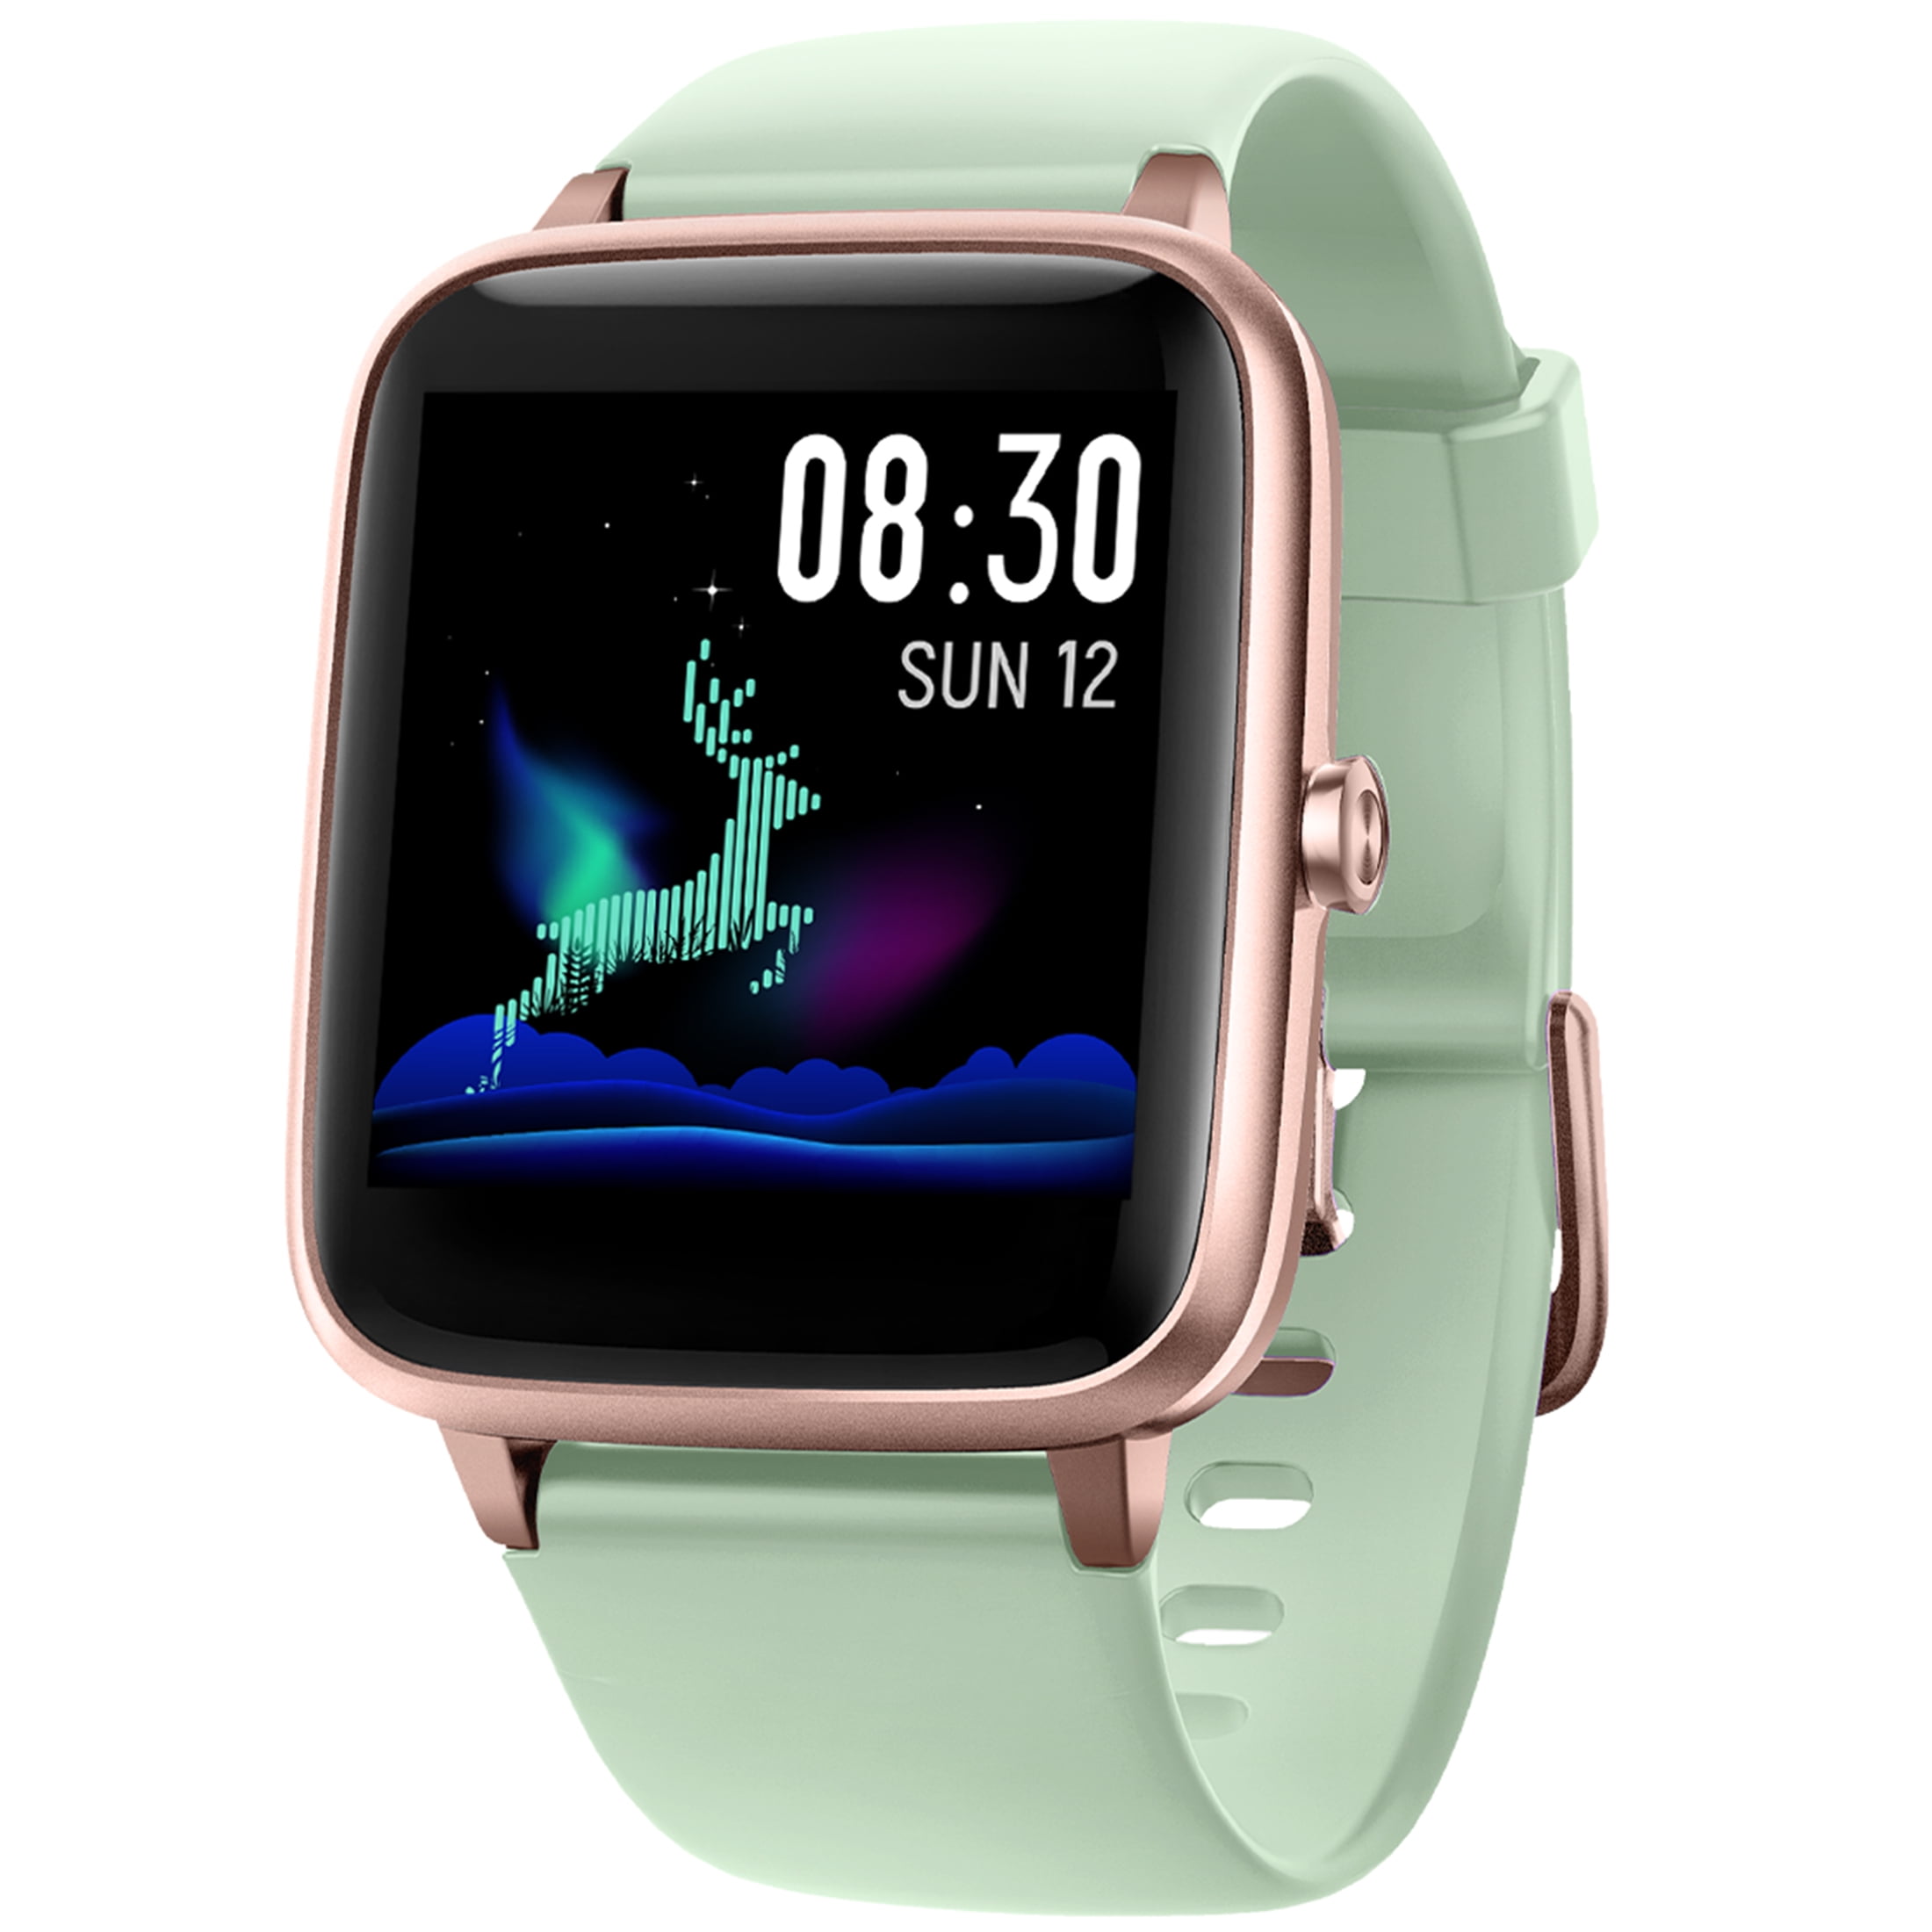 YAMAY YM021 Smart Watch for Android Samsung iPhone, Fitness Watches with Heart Rate Monitor, Touch Screen, Waterproof Smart Watches for Women Mint Green Sliver Walmart.com